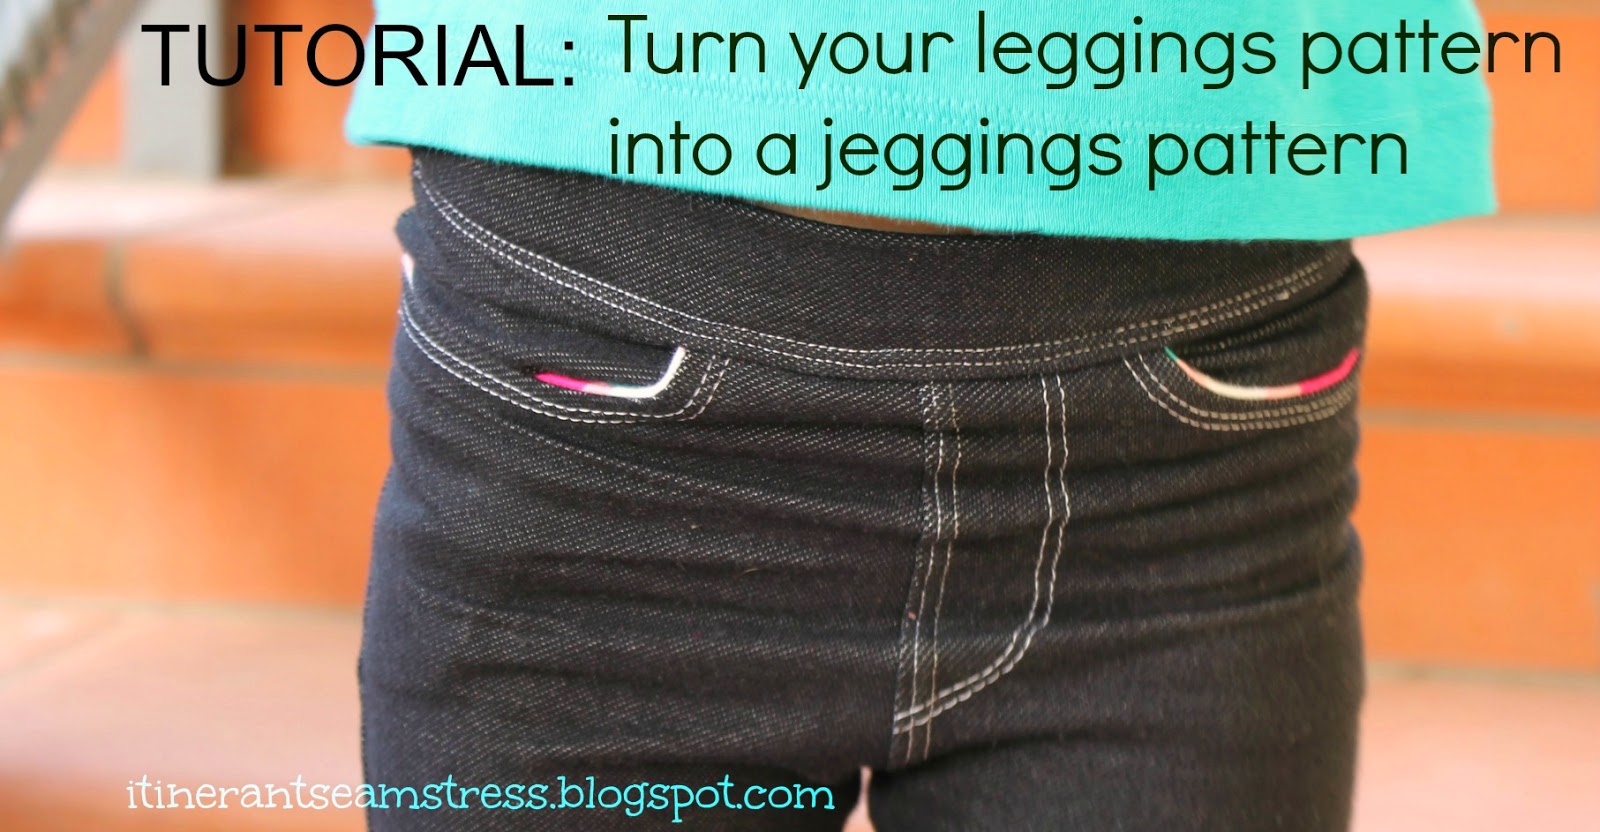 The Itinerant Seamstress: TUTORIAL: Leggings to Jeggings, Part 2